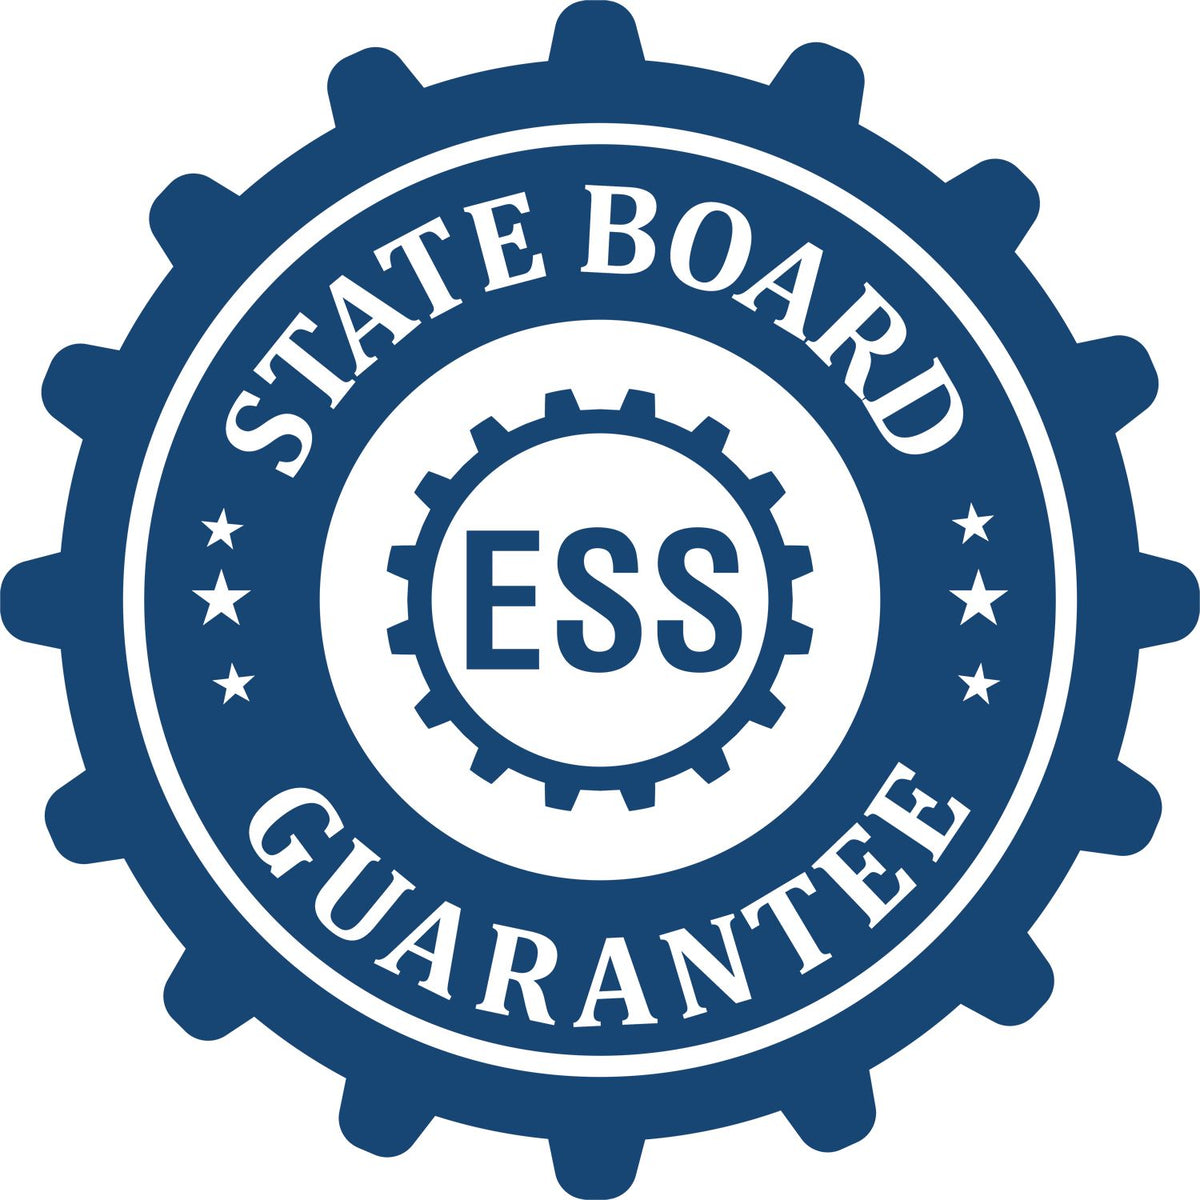 An emblem in a gear shape illustrating a state board guarantee for the Virginia Desk Architect Embossing Seal product.